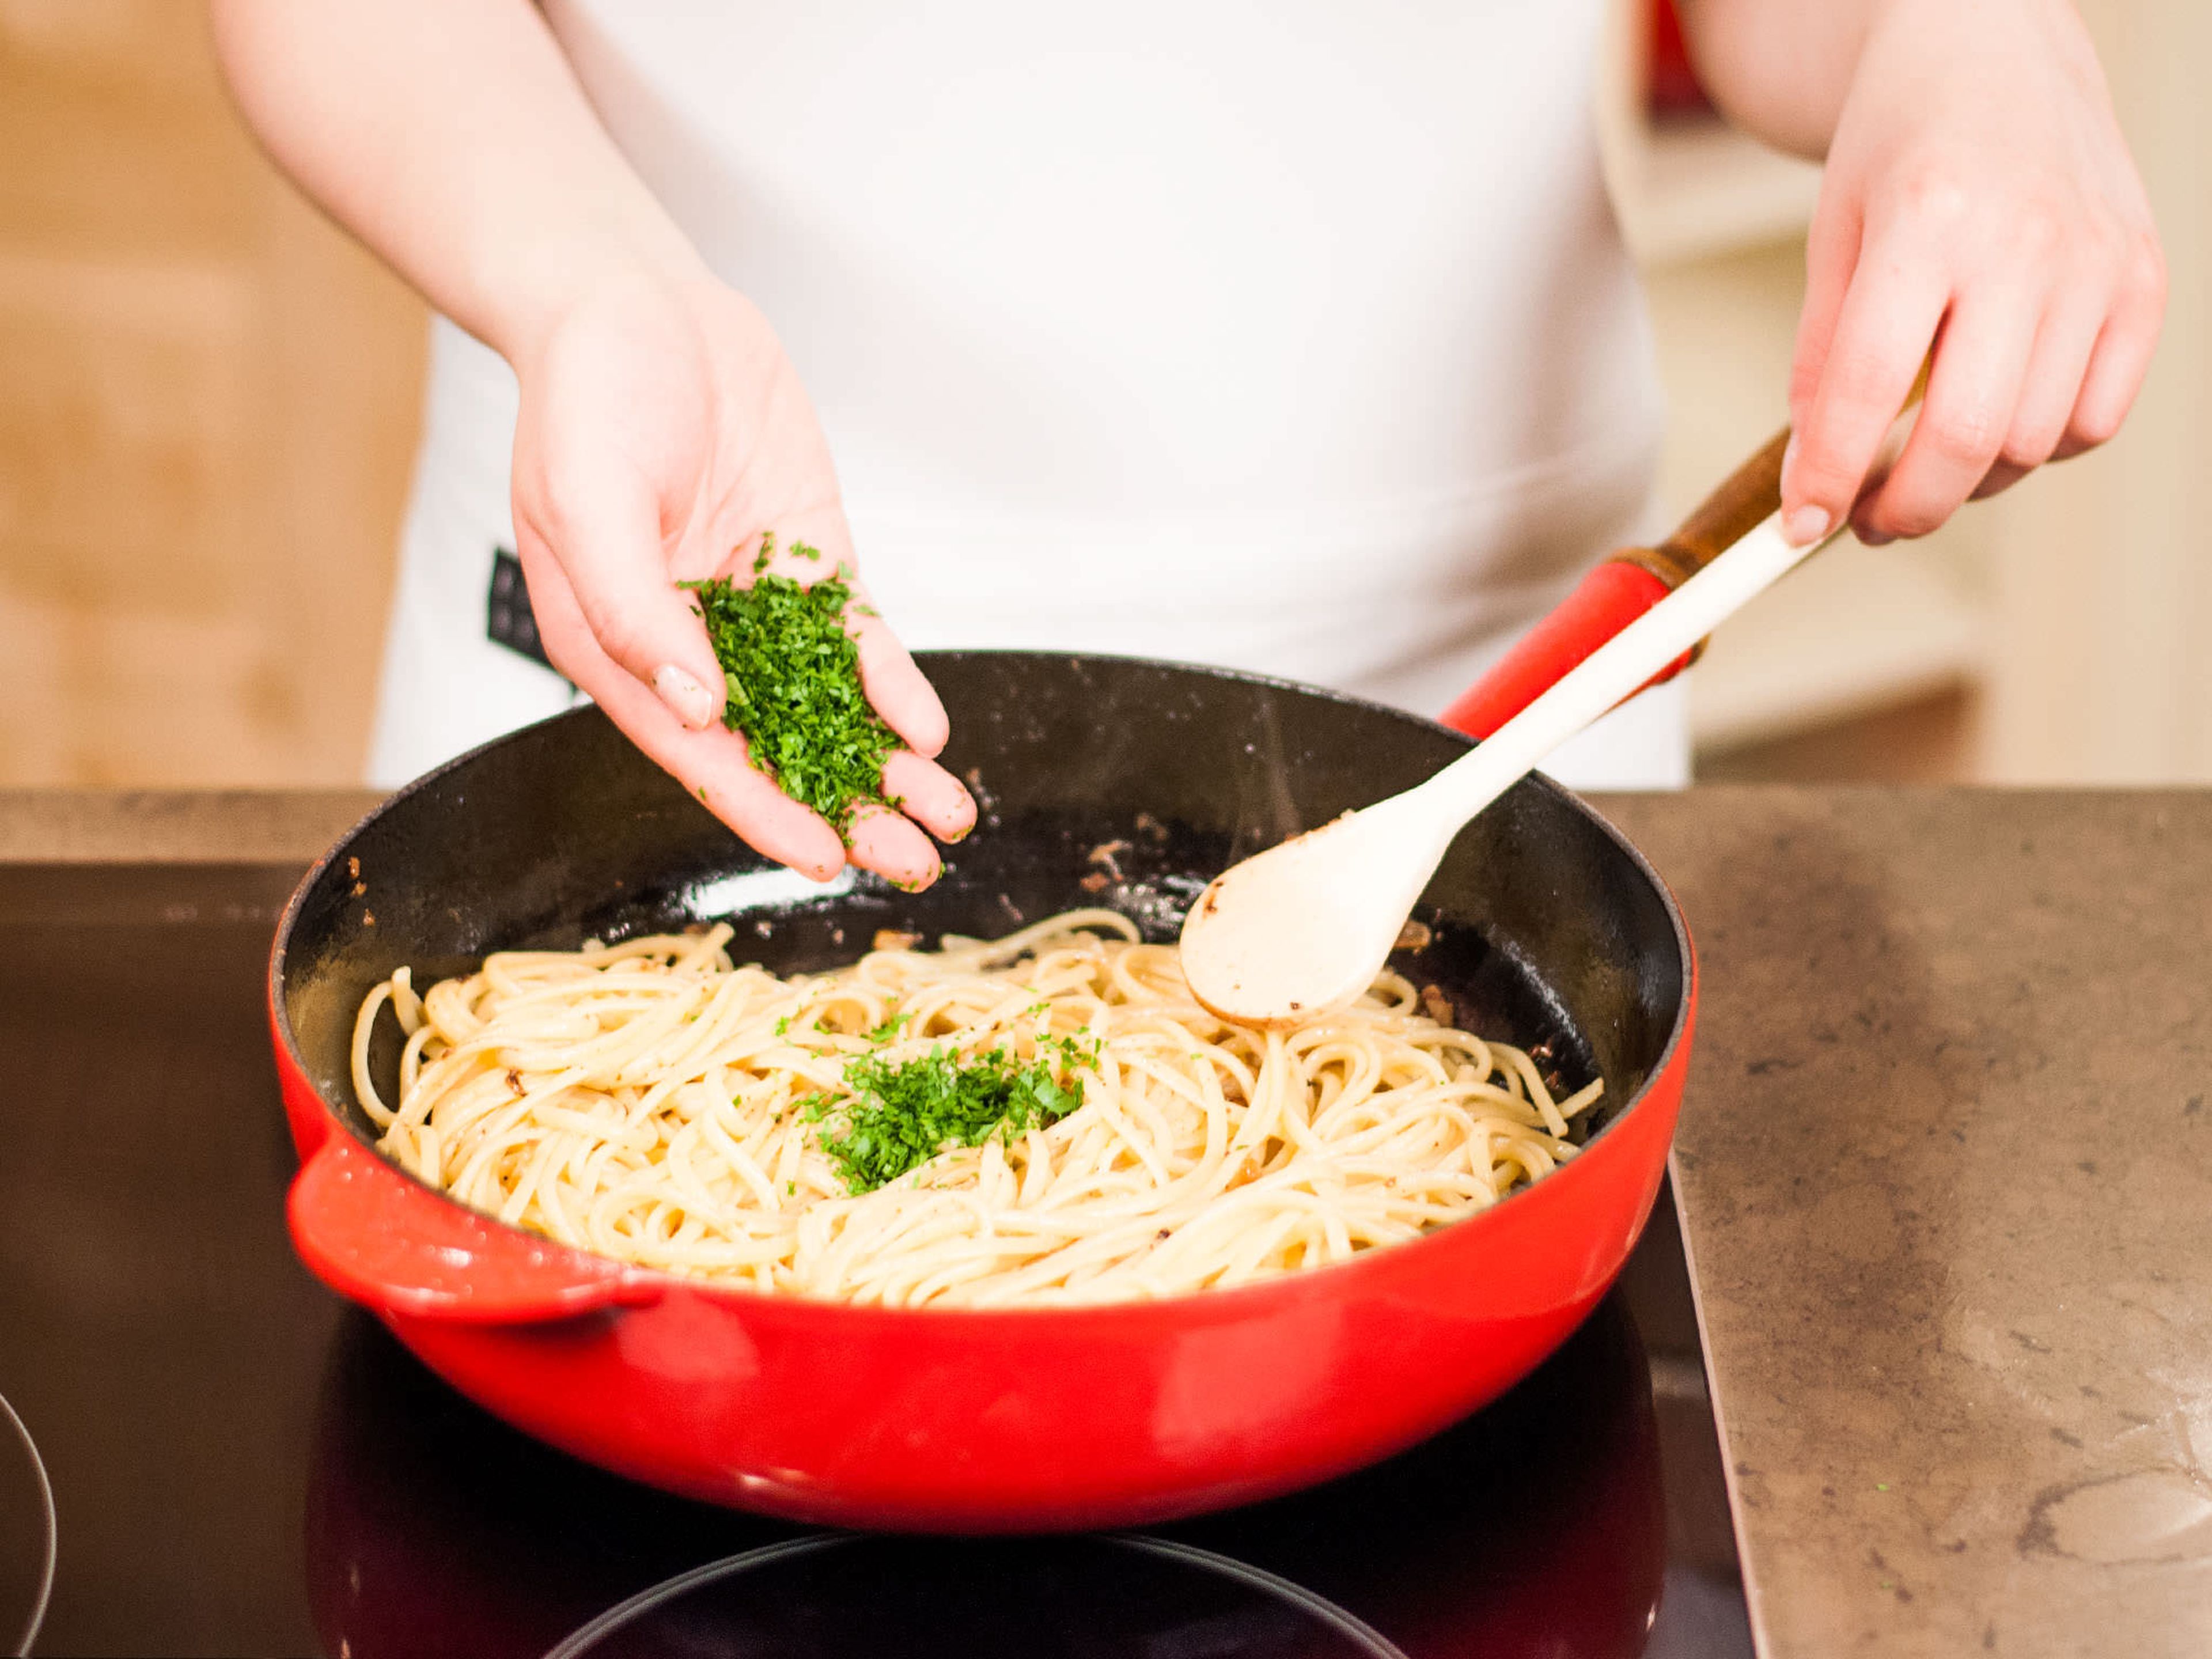 Add cooked pasta to the pan and toss in garlic oil. Fold in chopped parsley and season with salt and pepper. Serve sprinkled with freshly grated Parmesan cheese to taste.